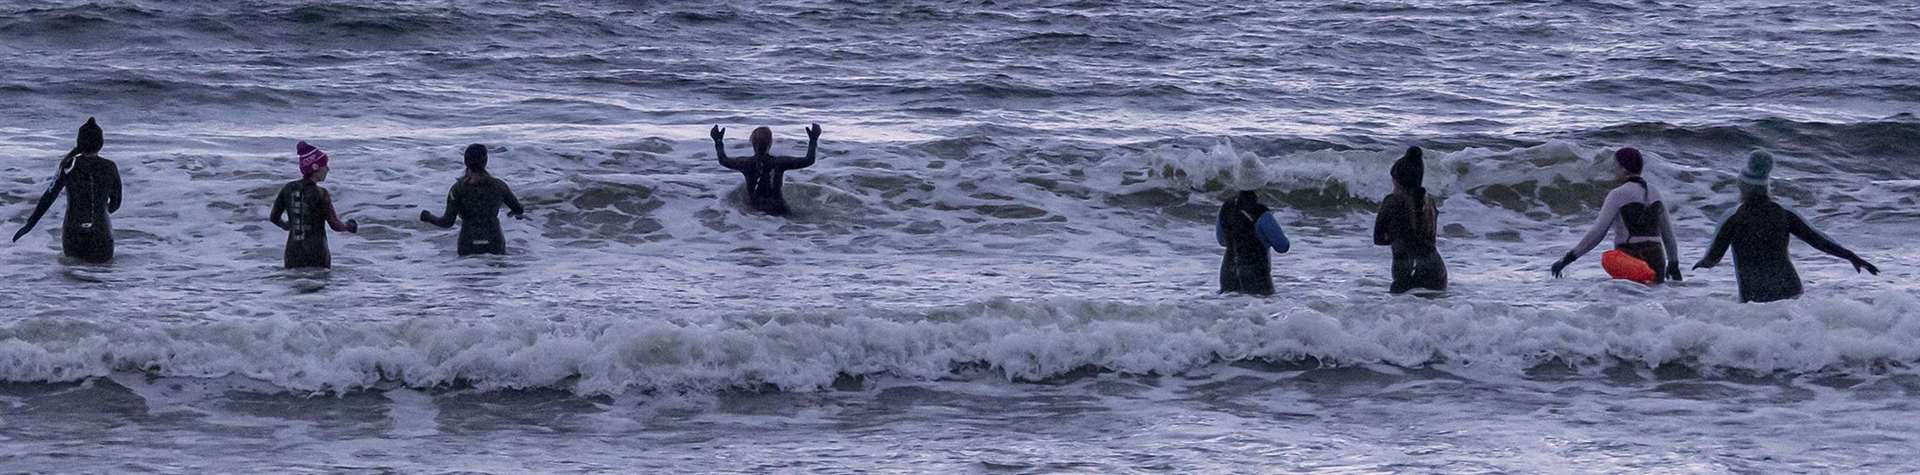 Rhionna Mackay posted an invitation on social media for wild swimmers to join her for a sunrise plunge into the North Sea at Brora beach. Picture: Louise Mackay